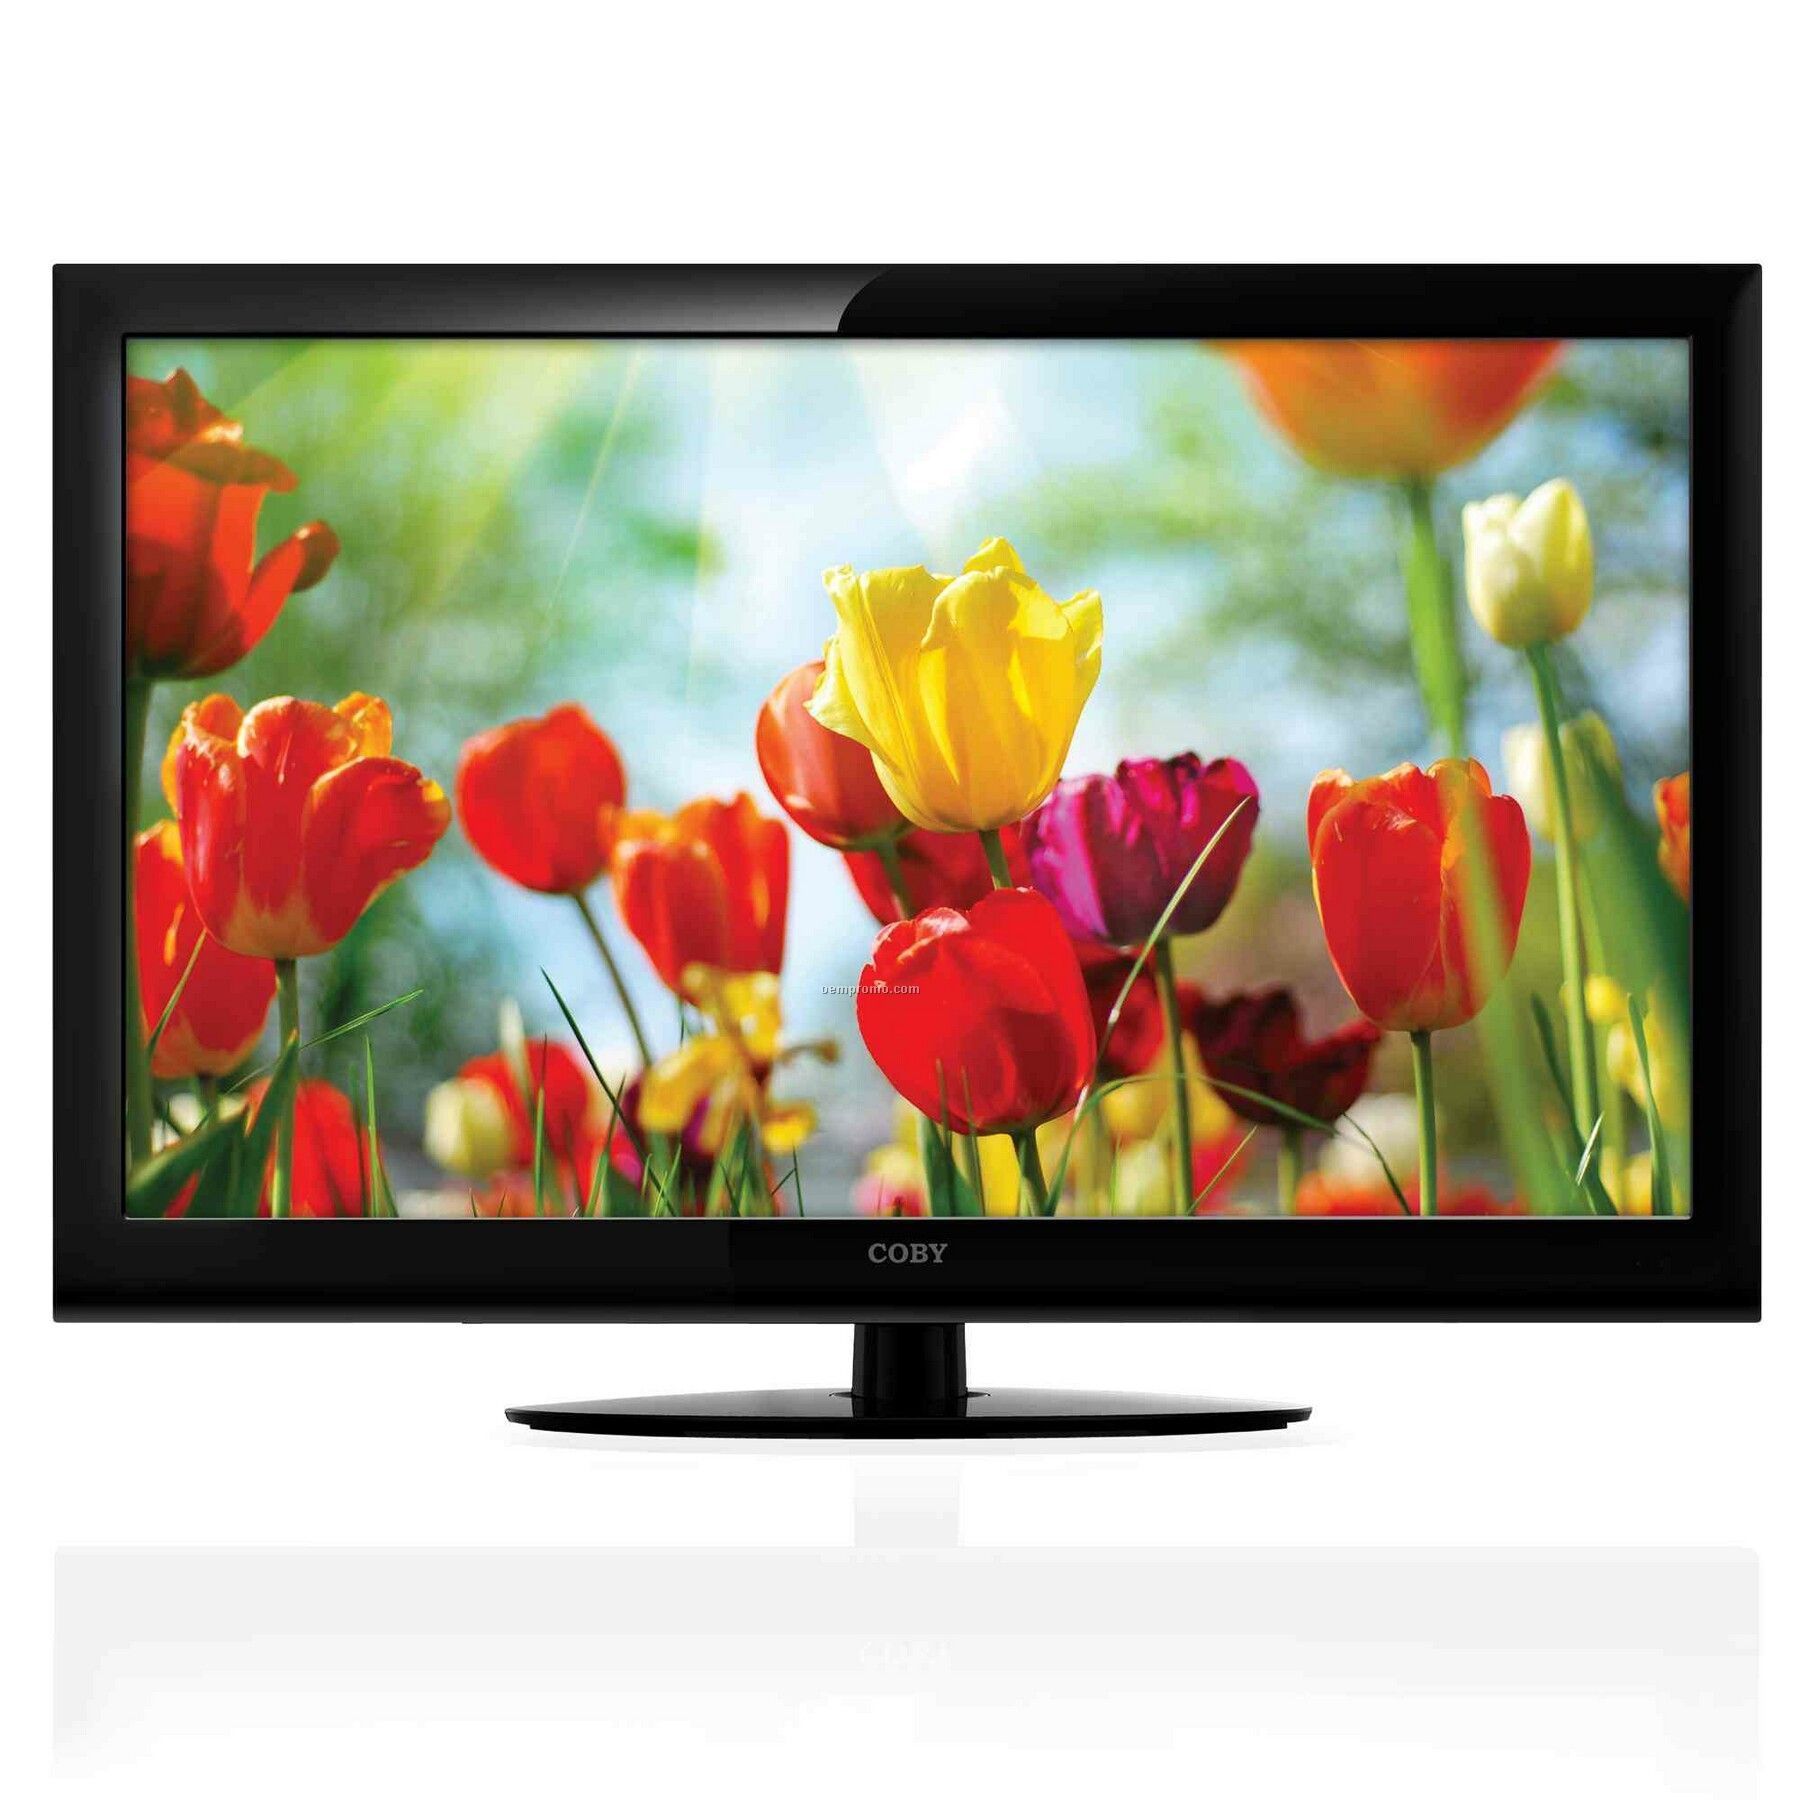 46" Class LED High-definition Tv